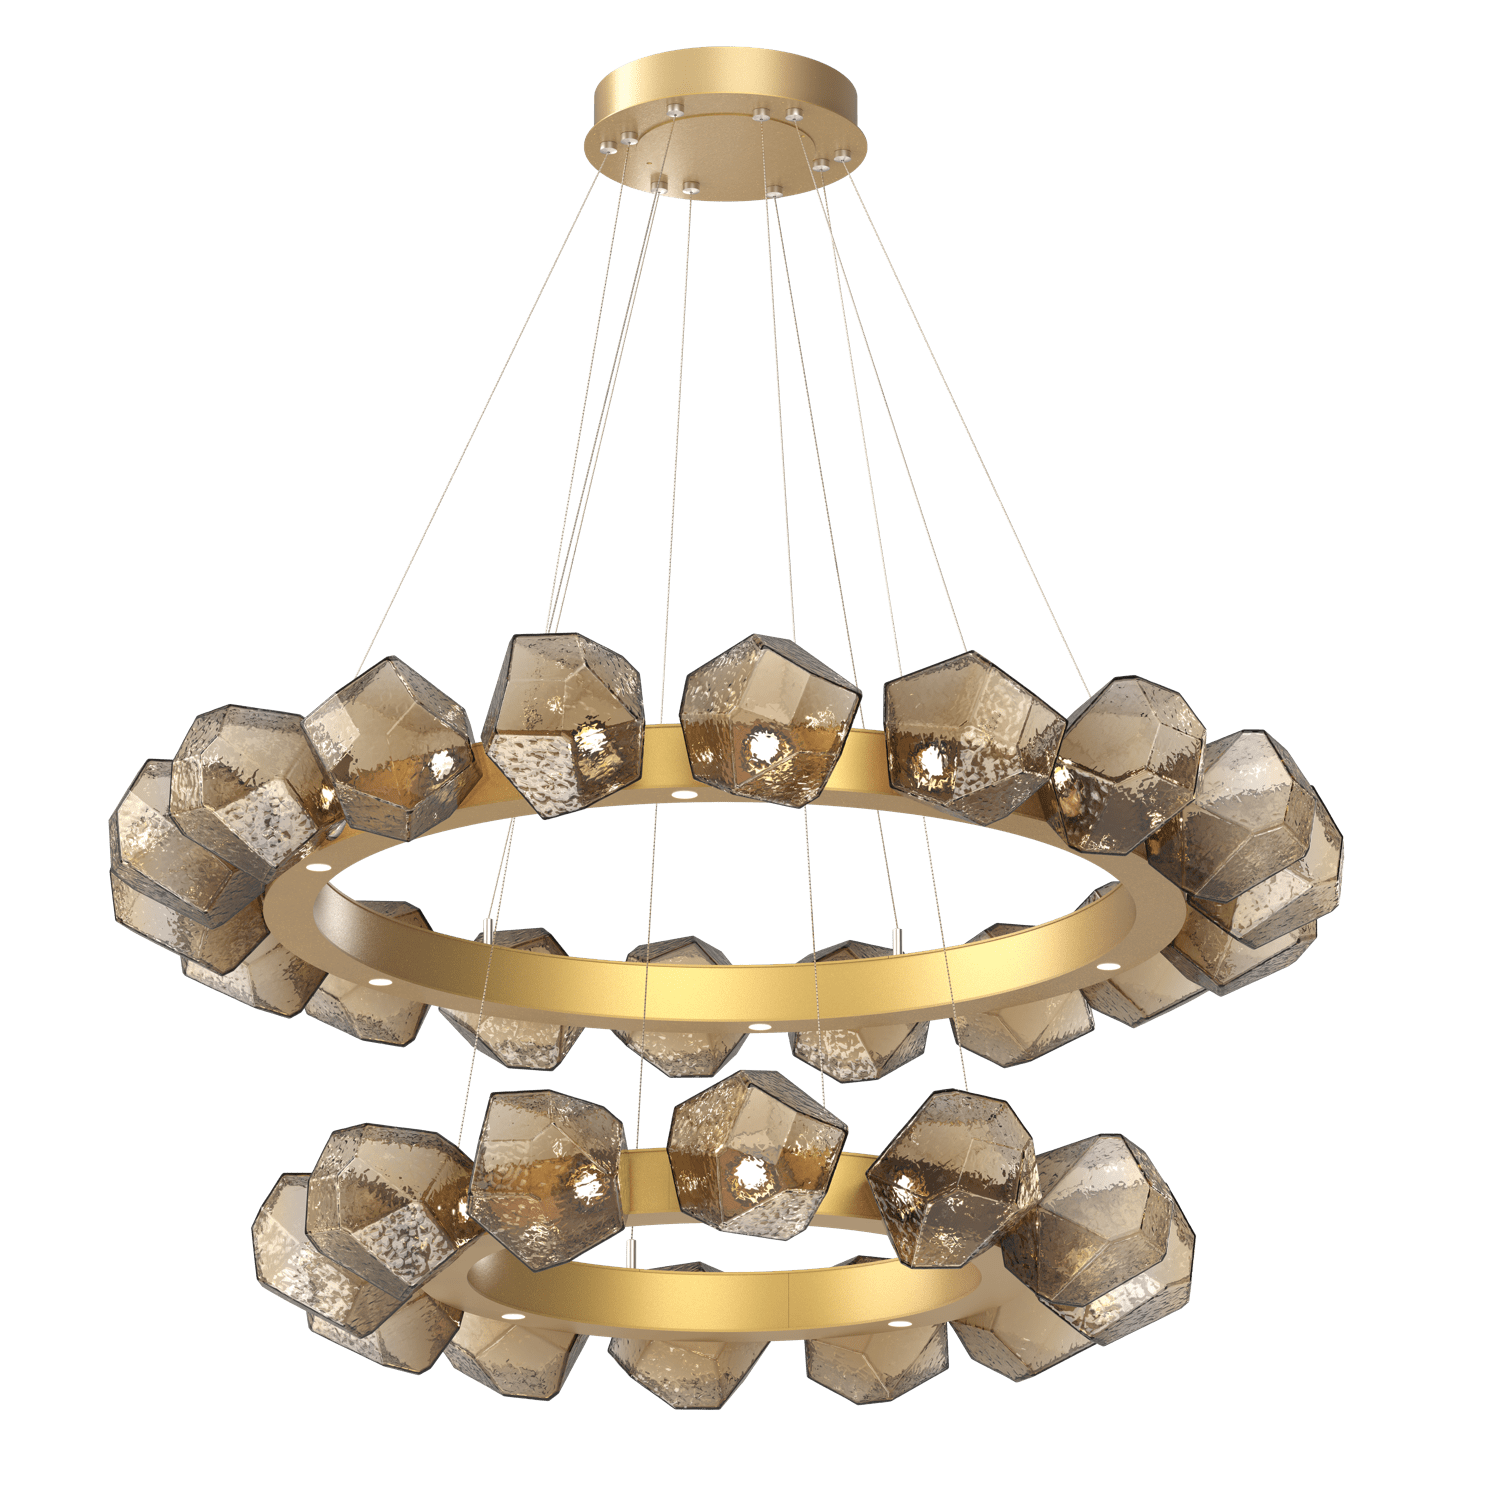 CHB0039-2T-GB-B-Hammerton-Studio-Gem-48-inch-two-tier-radial-ring-chandelier-with-gilded-brass-finish-and-bronze-blown-glass-shades-and-LED-lamping